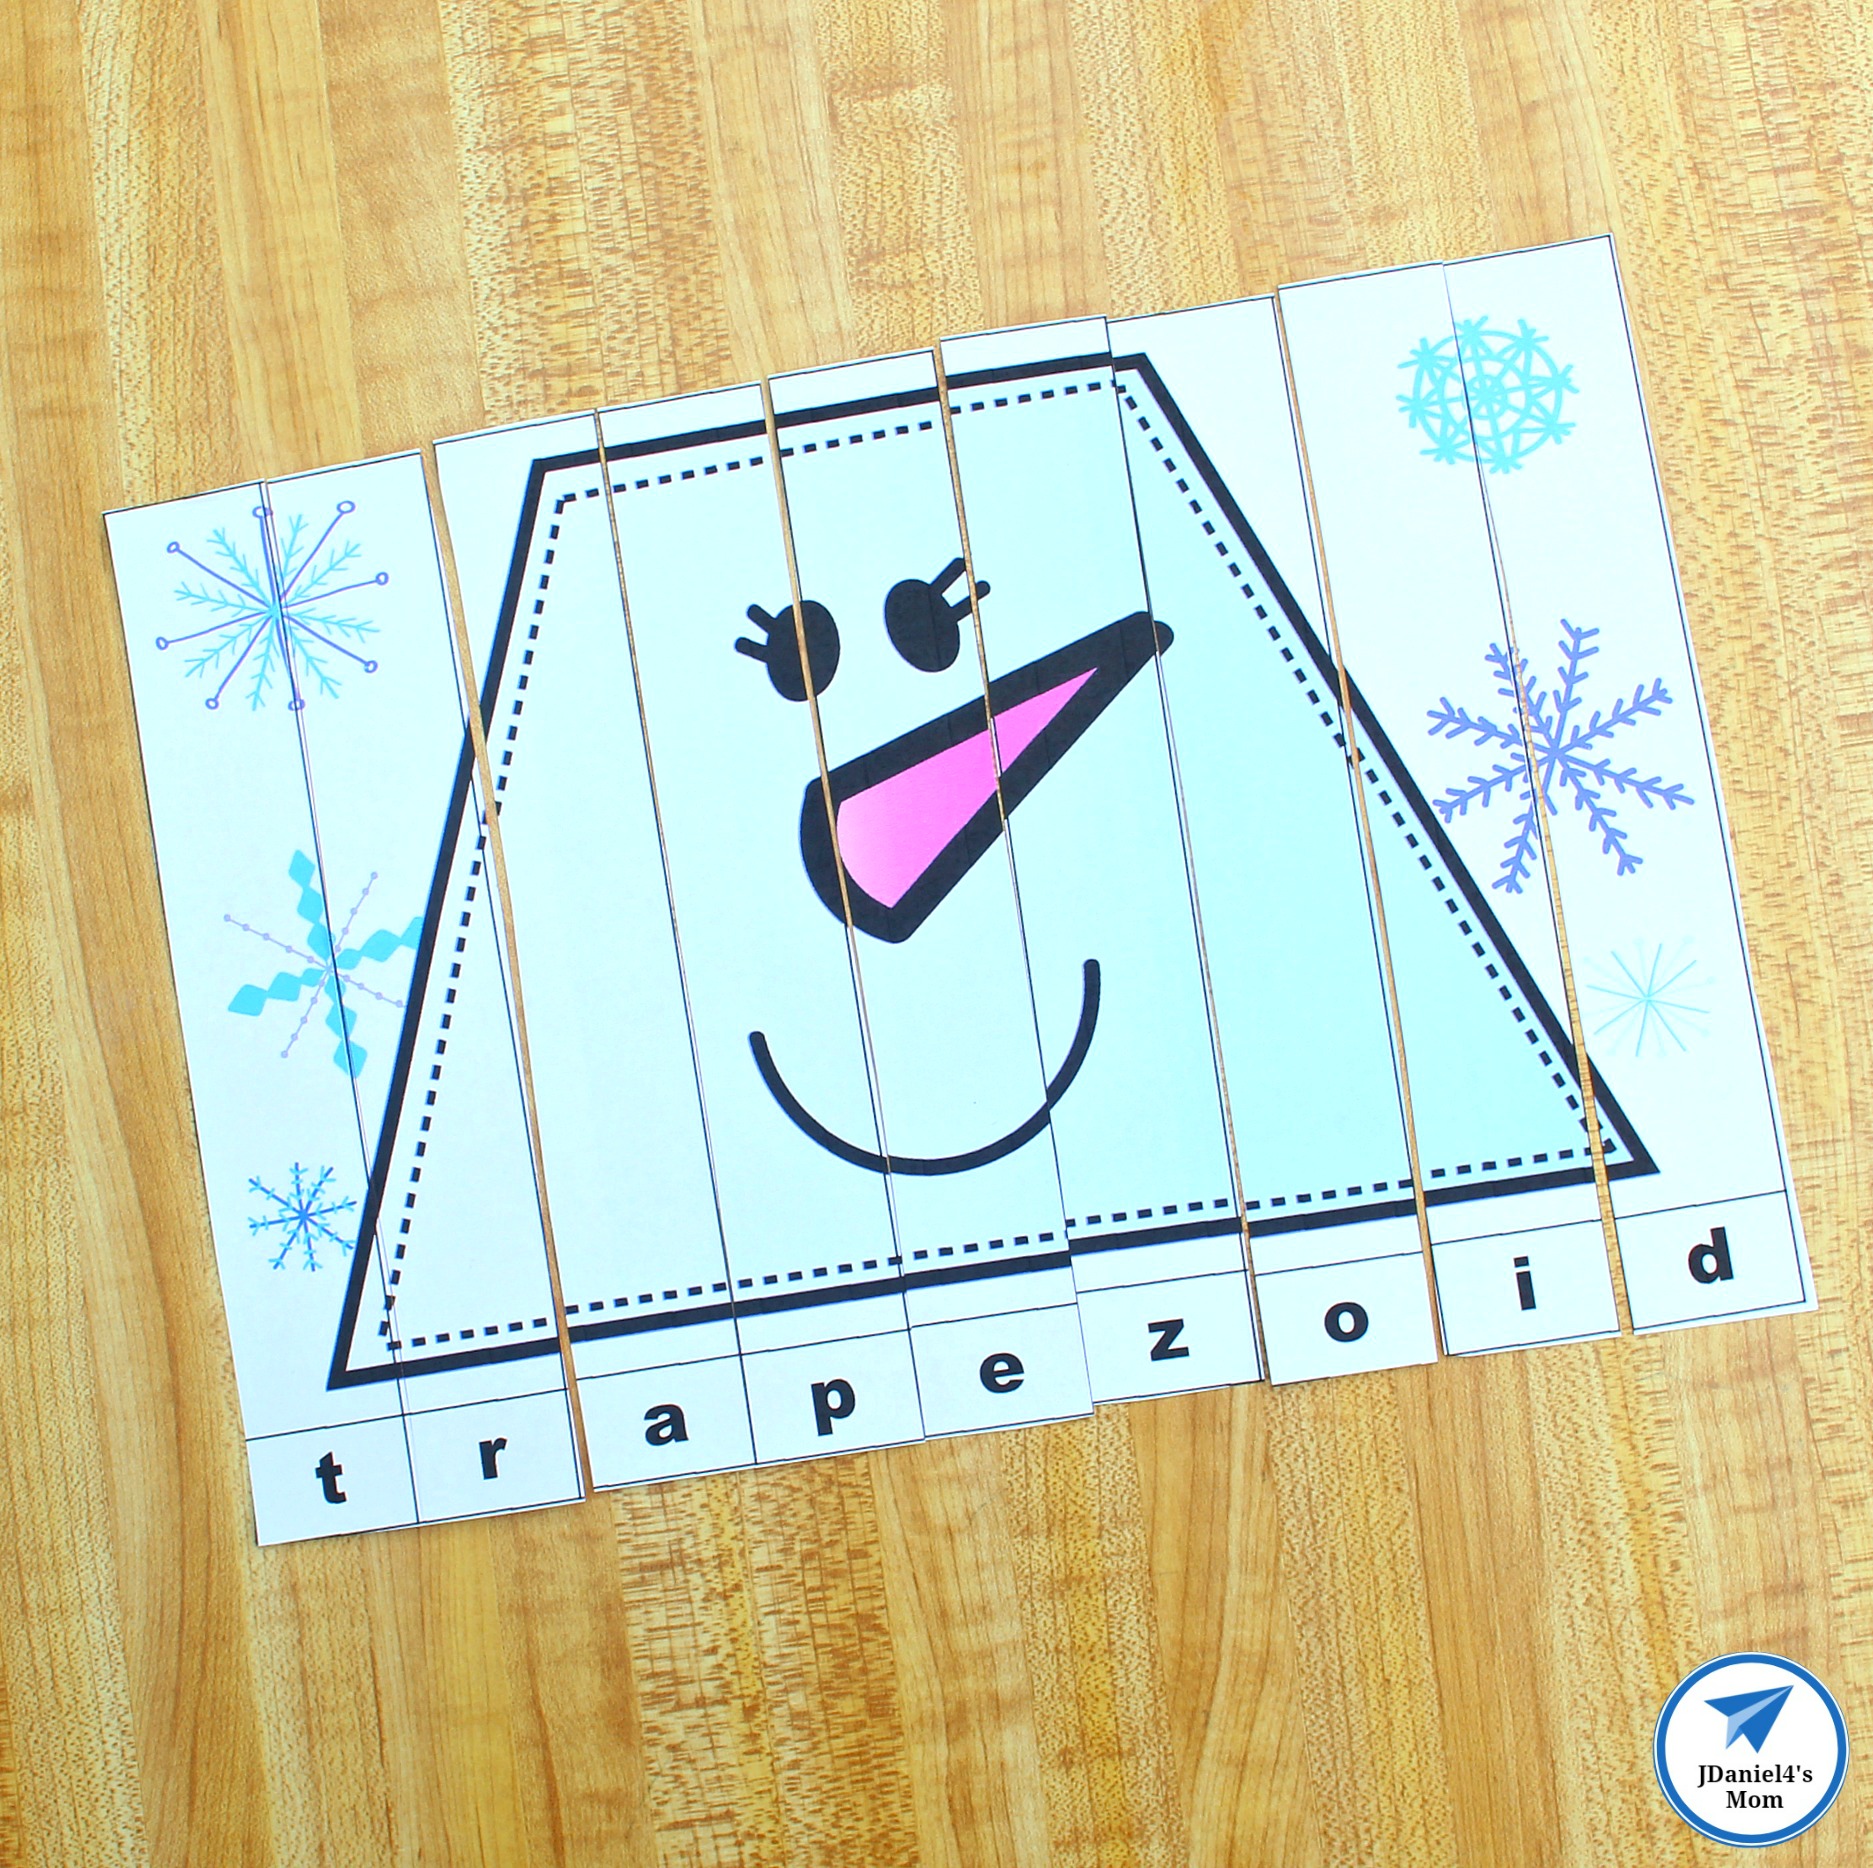 Snowman Shapes for Kids Printable Puzzles- This is the trapezoid puzzle.